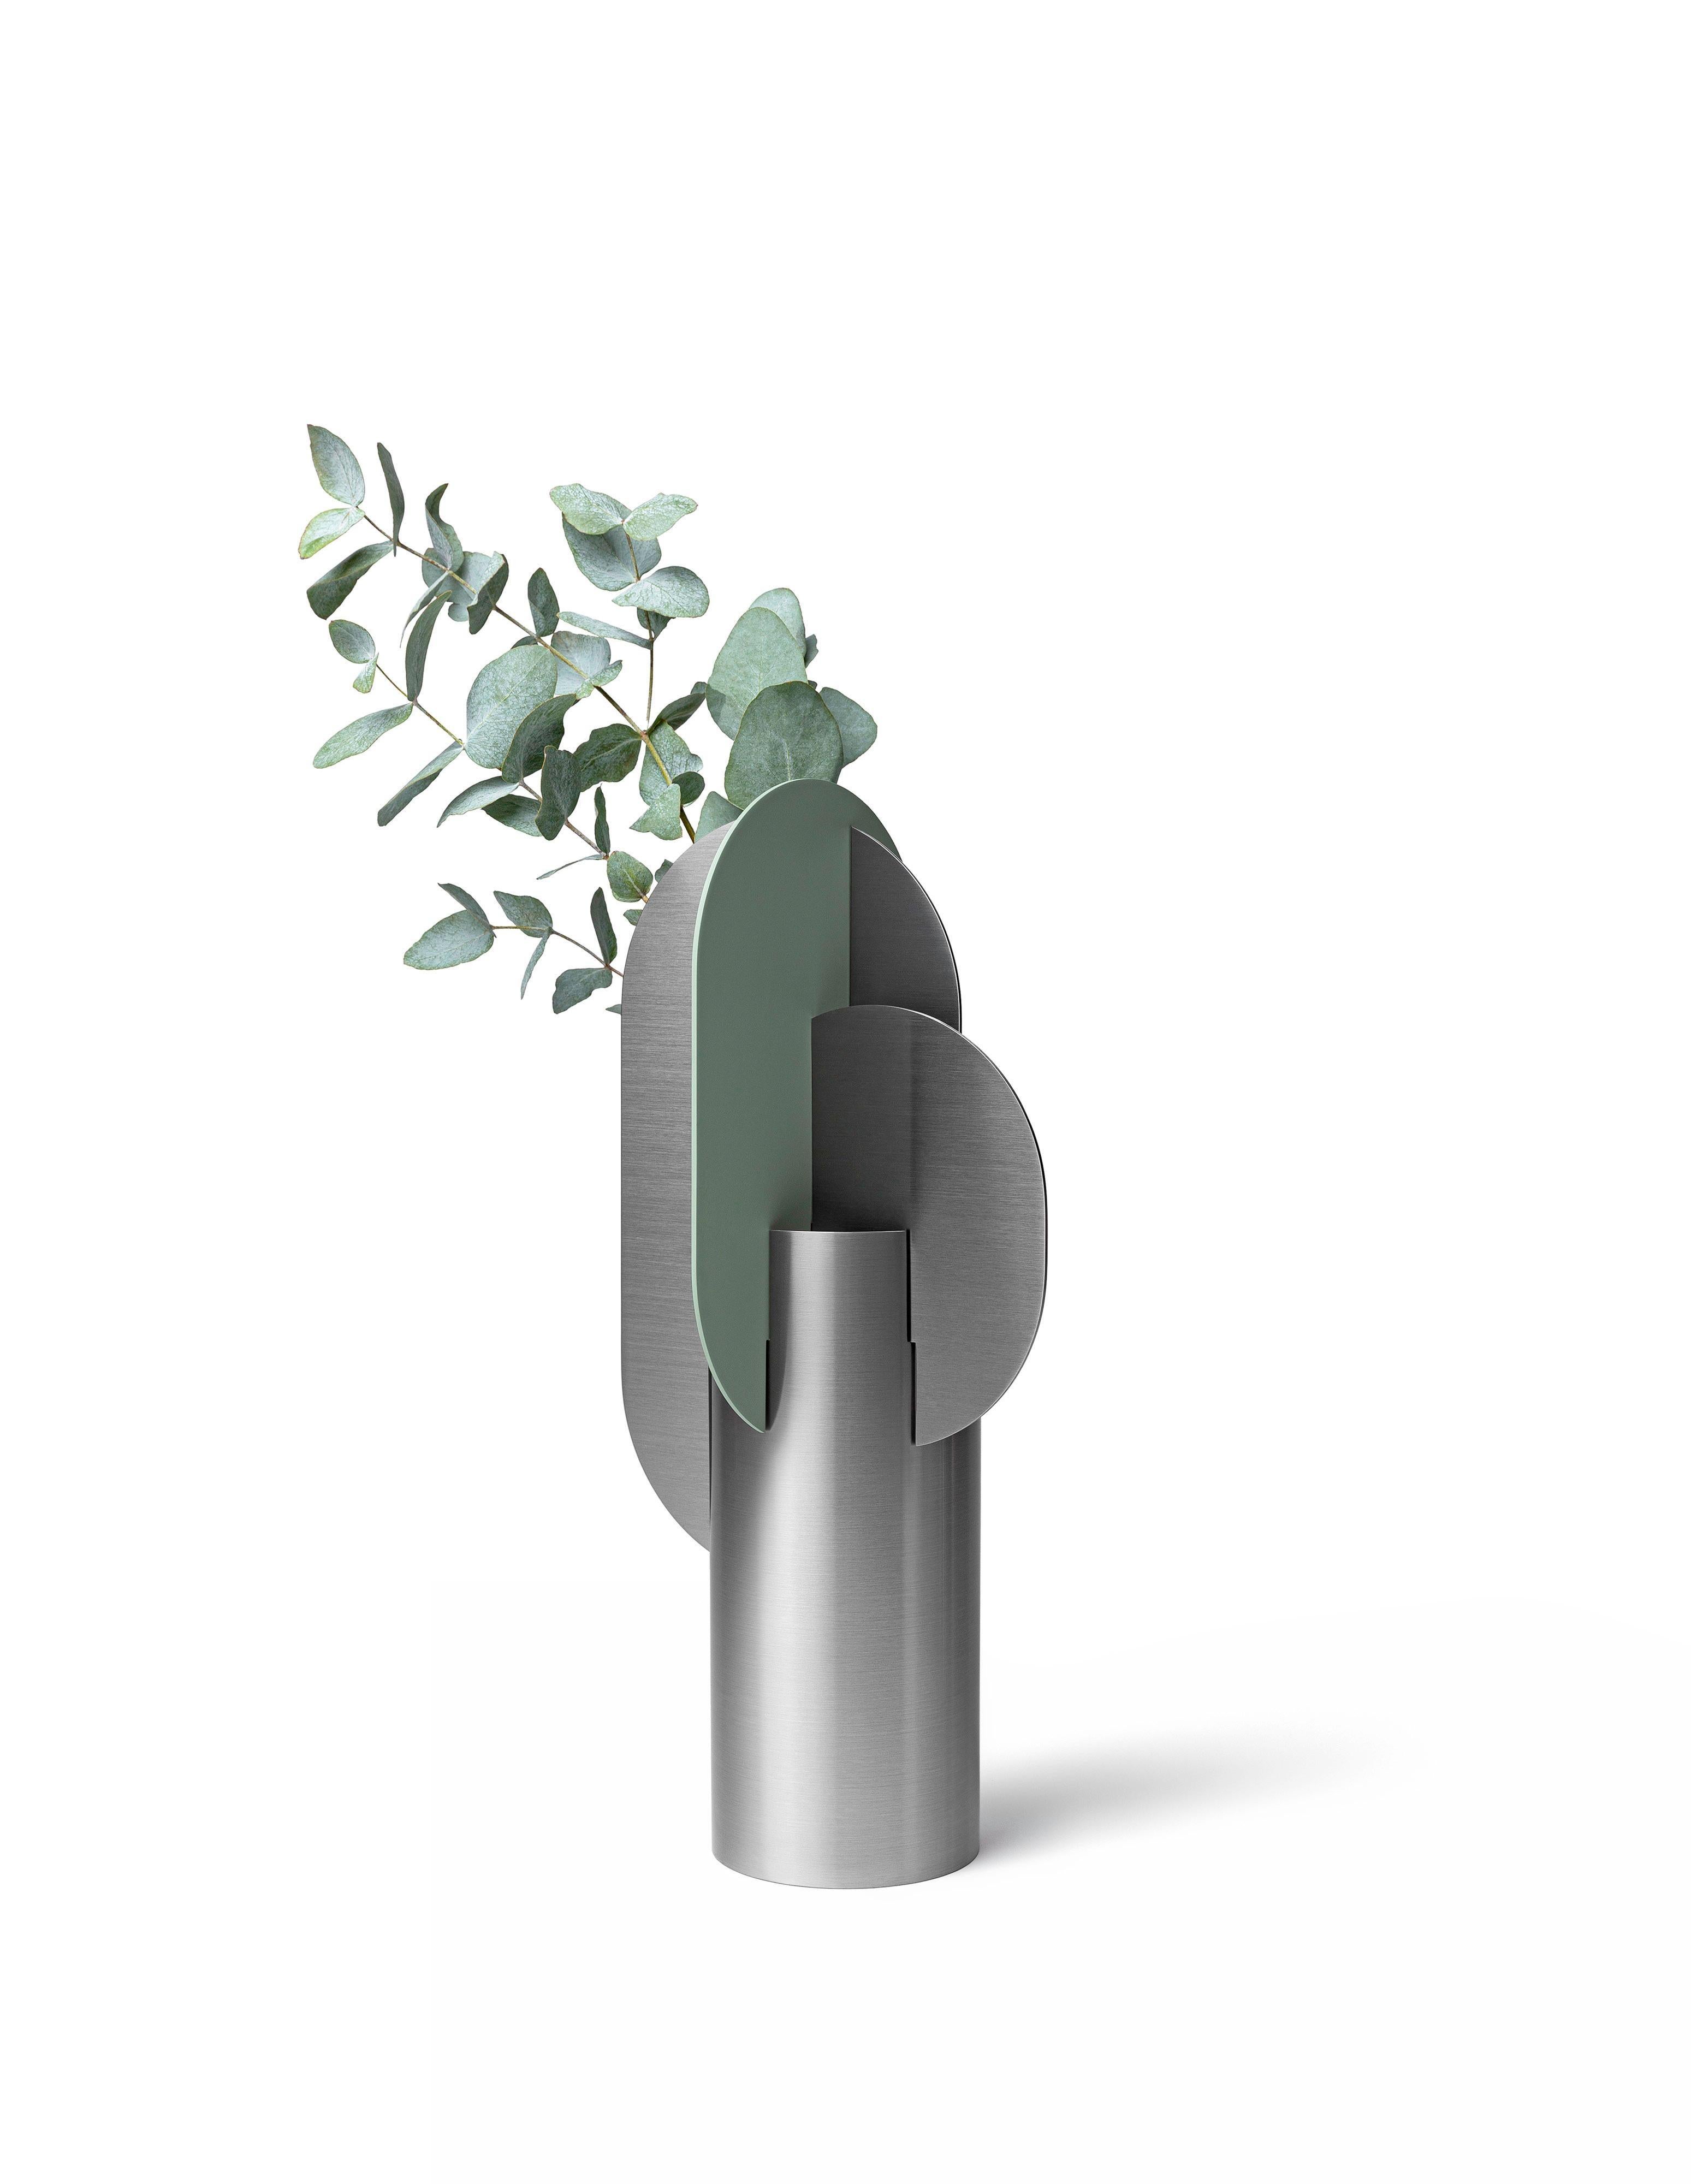 Organic Modern Contemporary Metal Vase 'Ekster CS11' by Noom, Brushed Stainless Steel For Sale